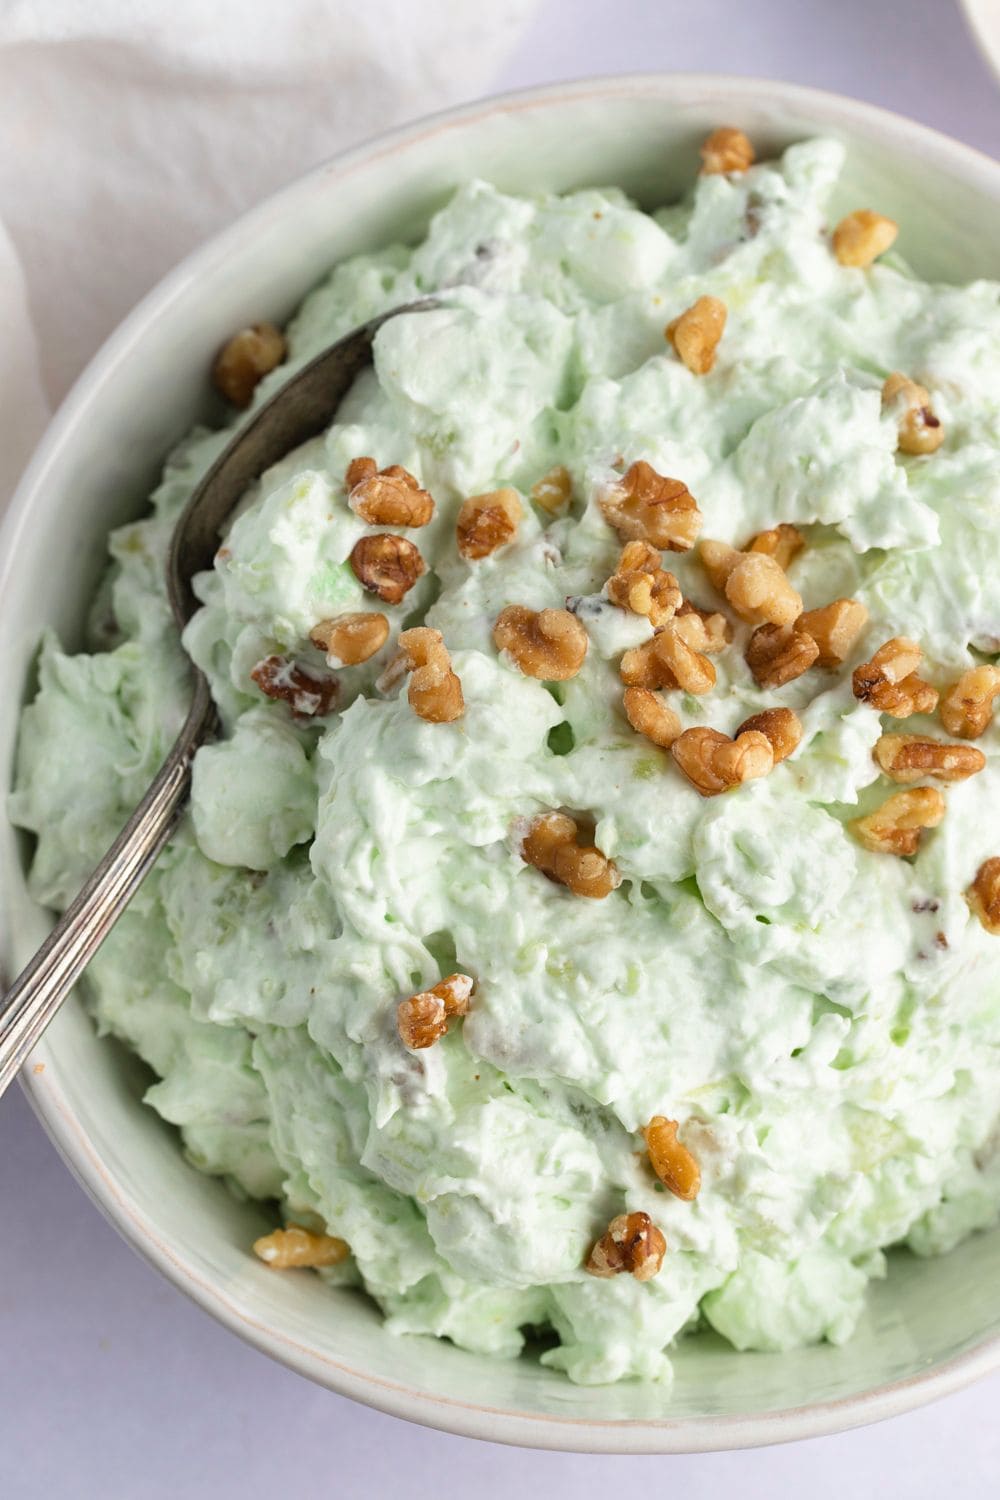 Watergate salad made with made with instant pudding mix, juicy pineapple, miniature marshmallows, and whipped cream, garnished with chopped pecans.